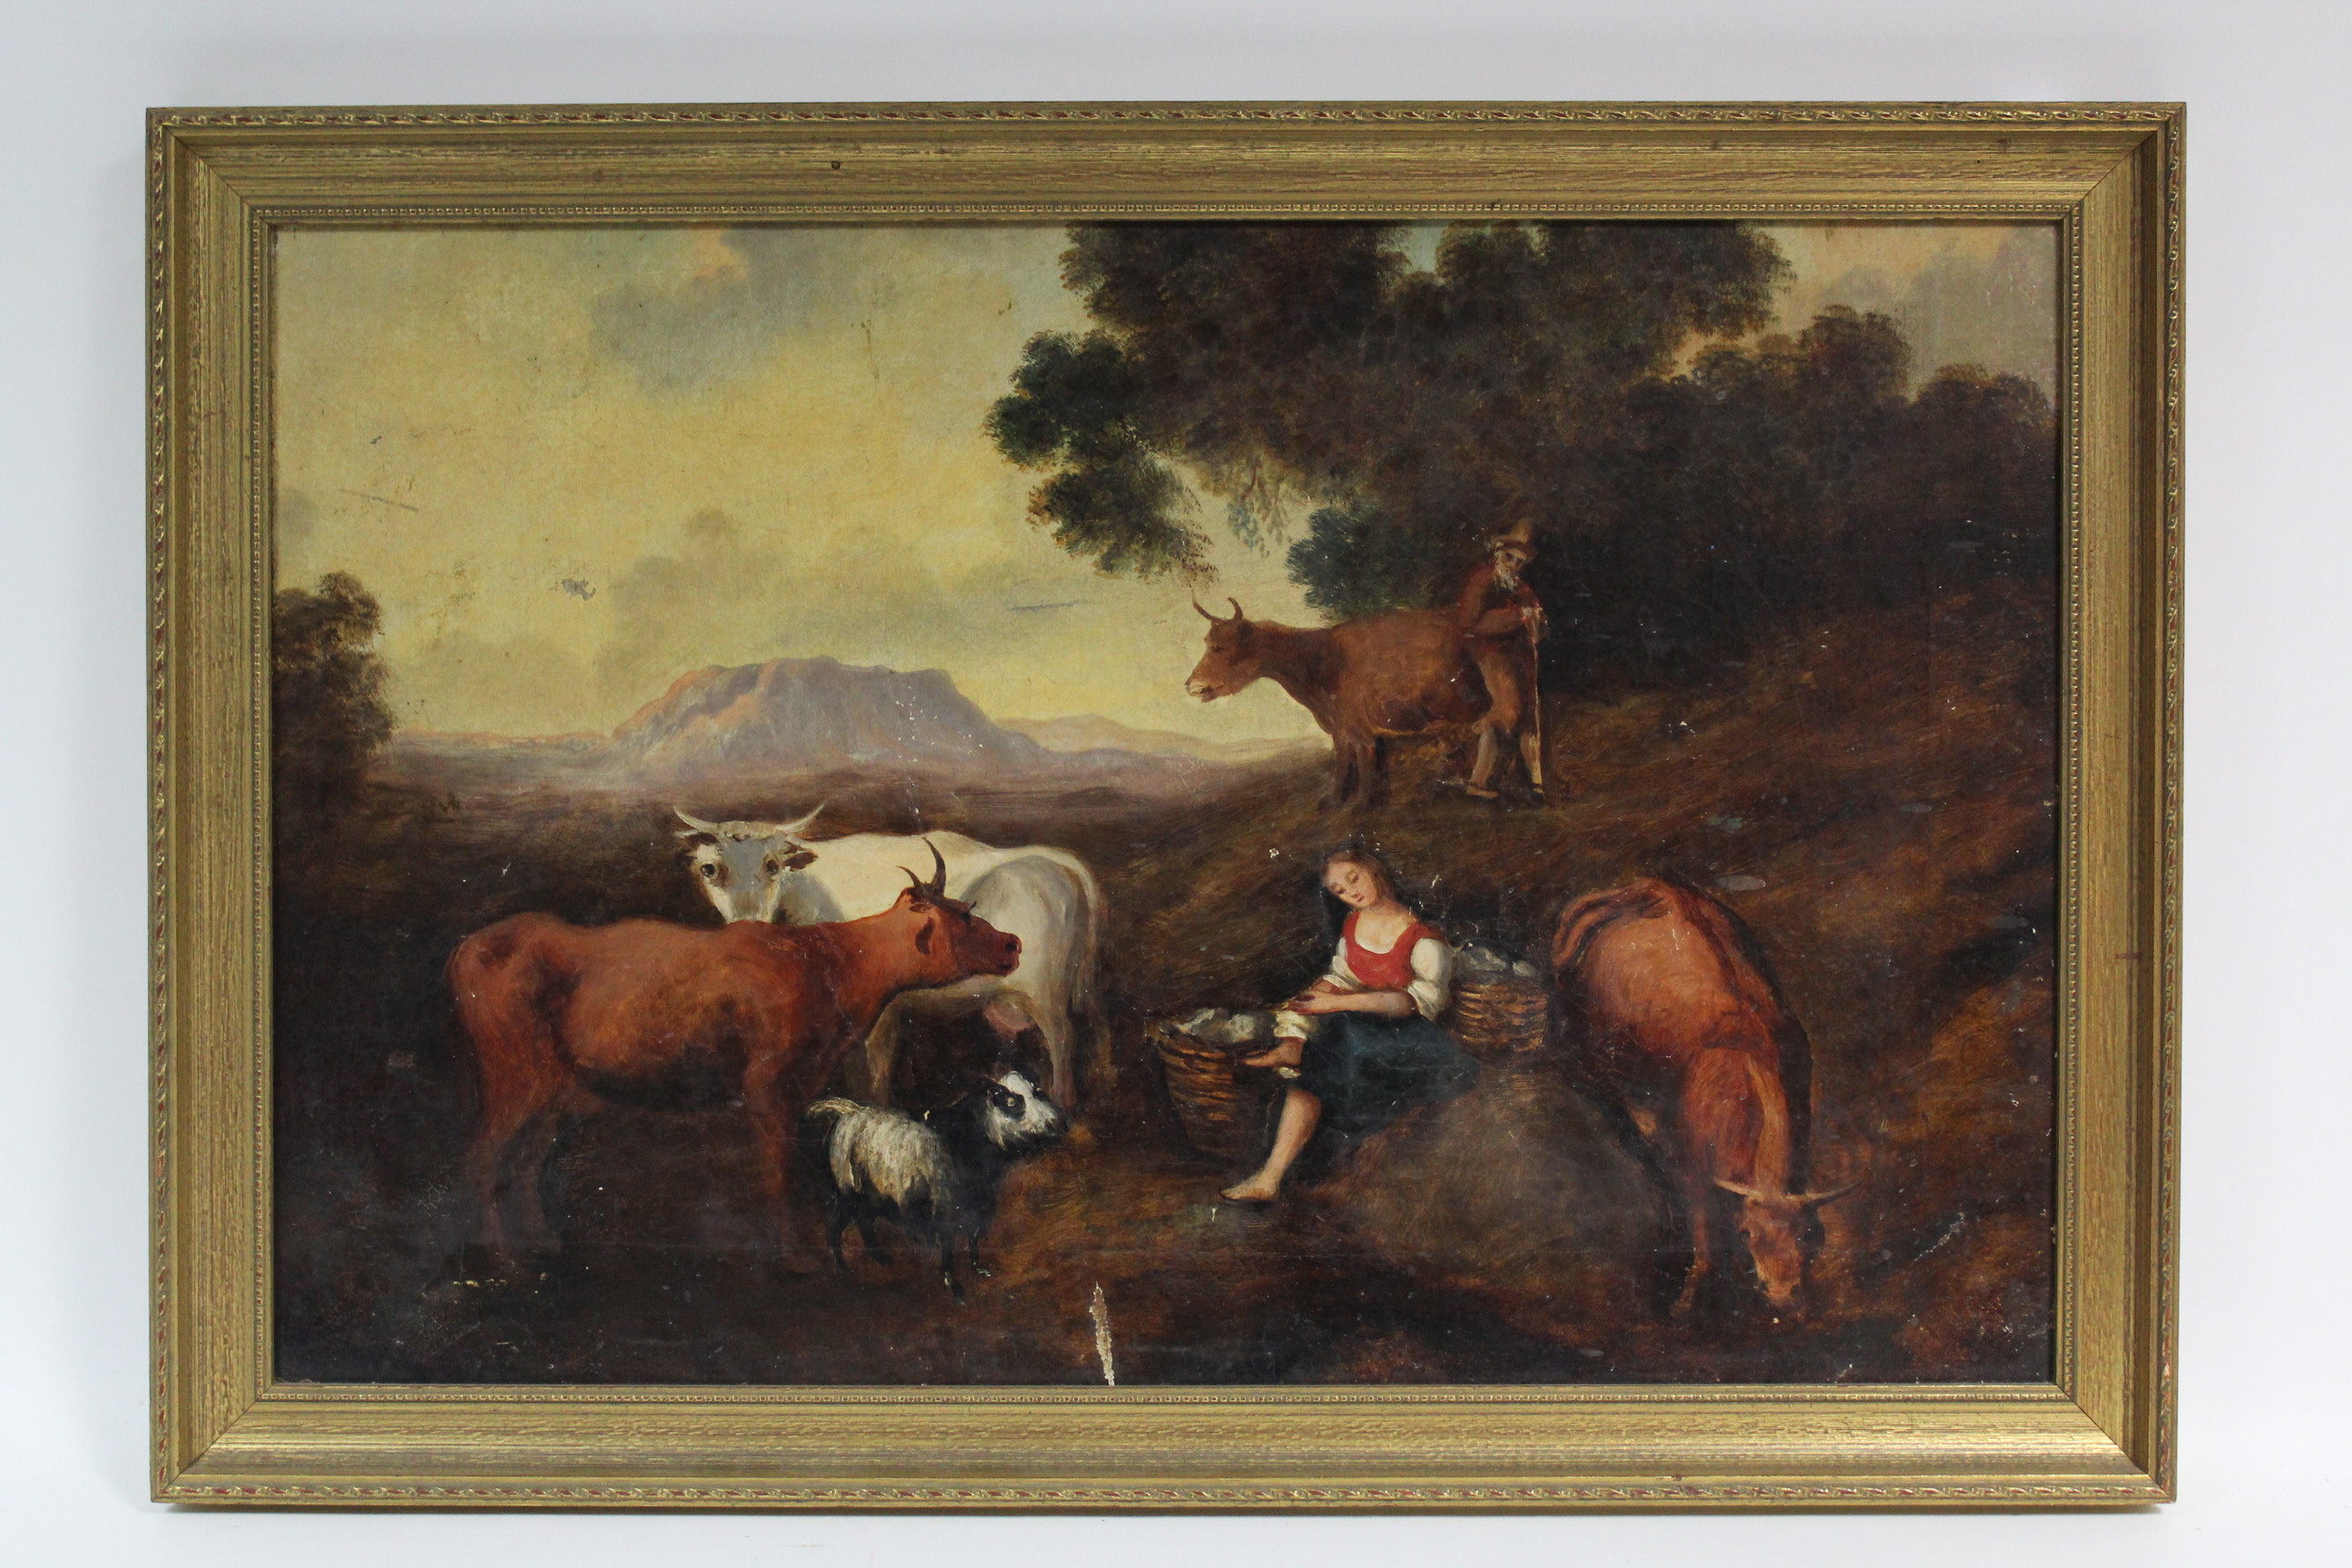 ENGLISH SCHOOL, 19th century. A wooded landscape with figures, cattle, & goats to the fore. Oil on